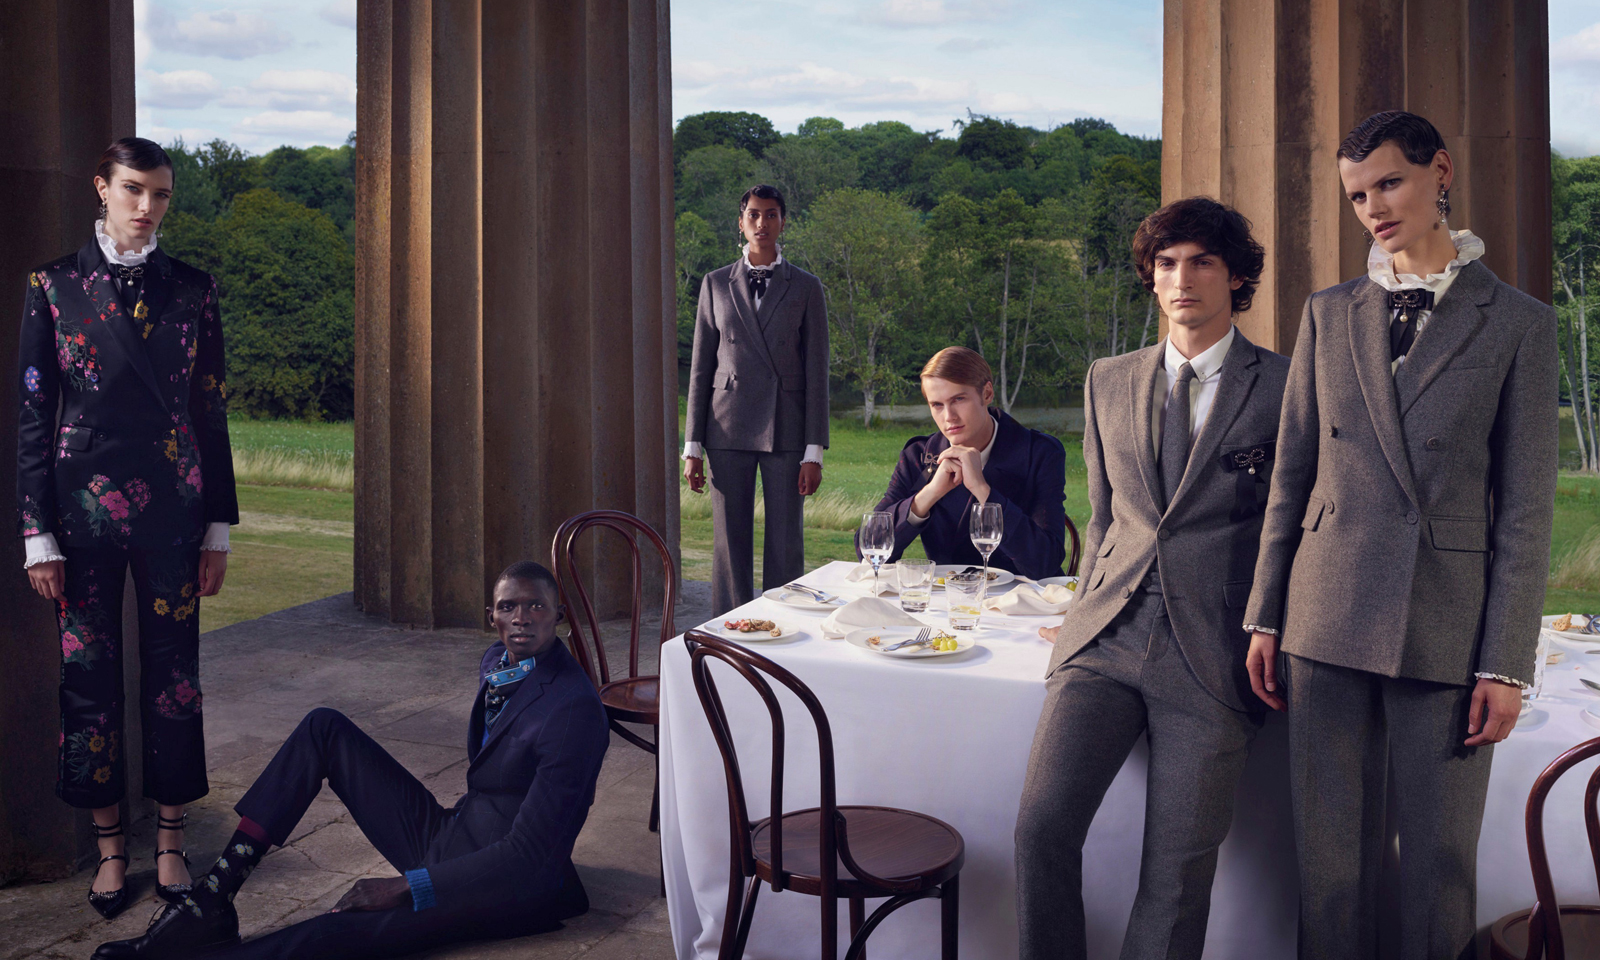 Family Portraits ERDEM x H&M by Photographer Michal Pudelka